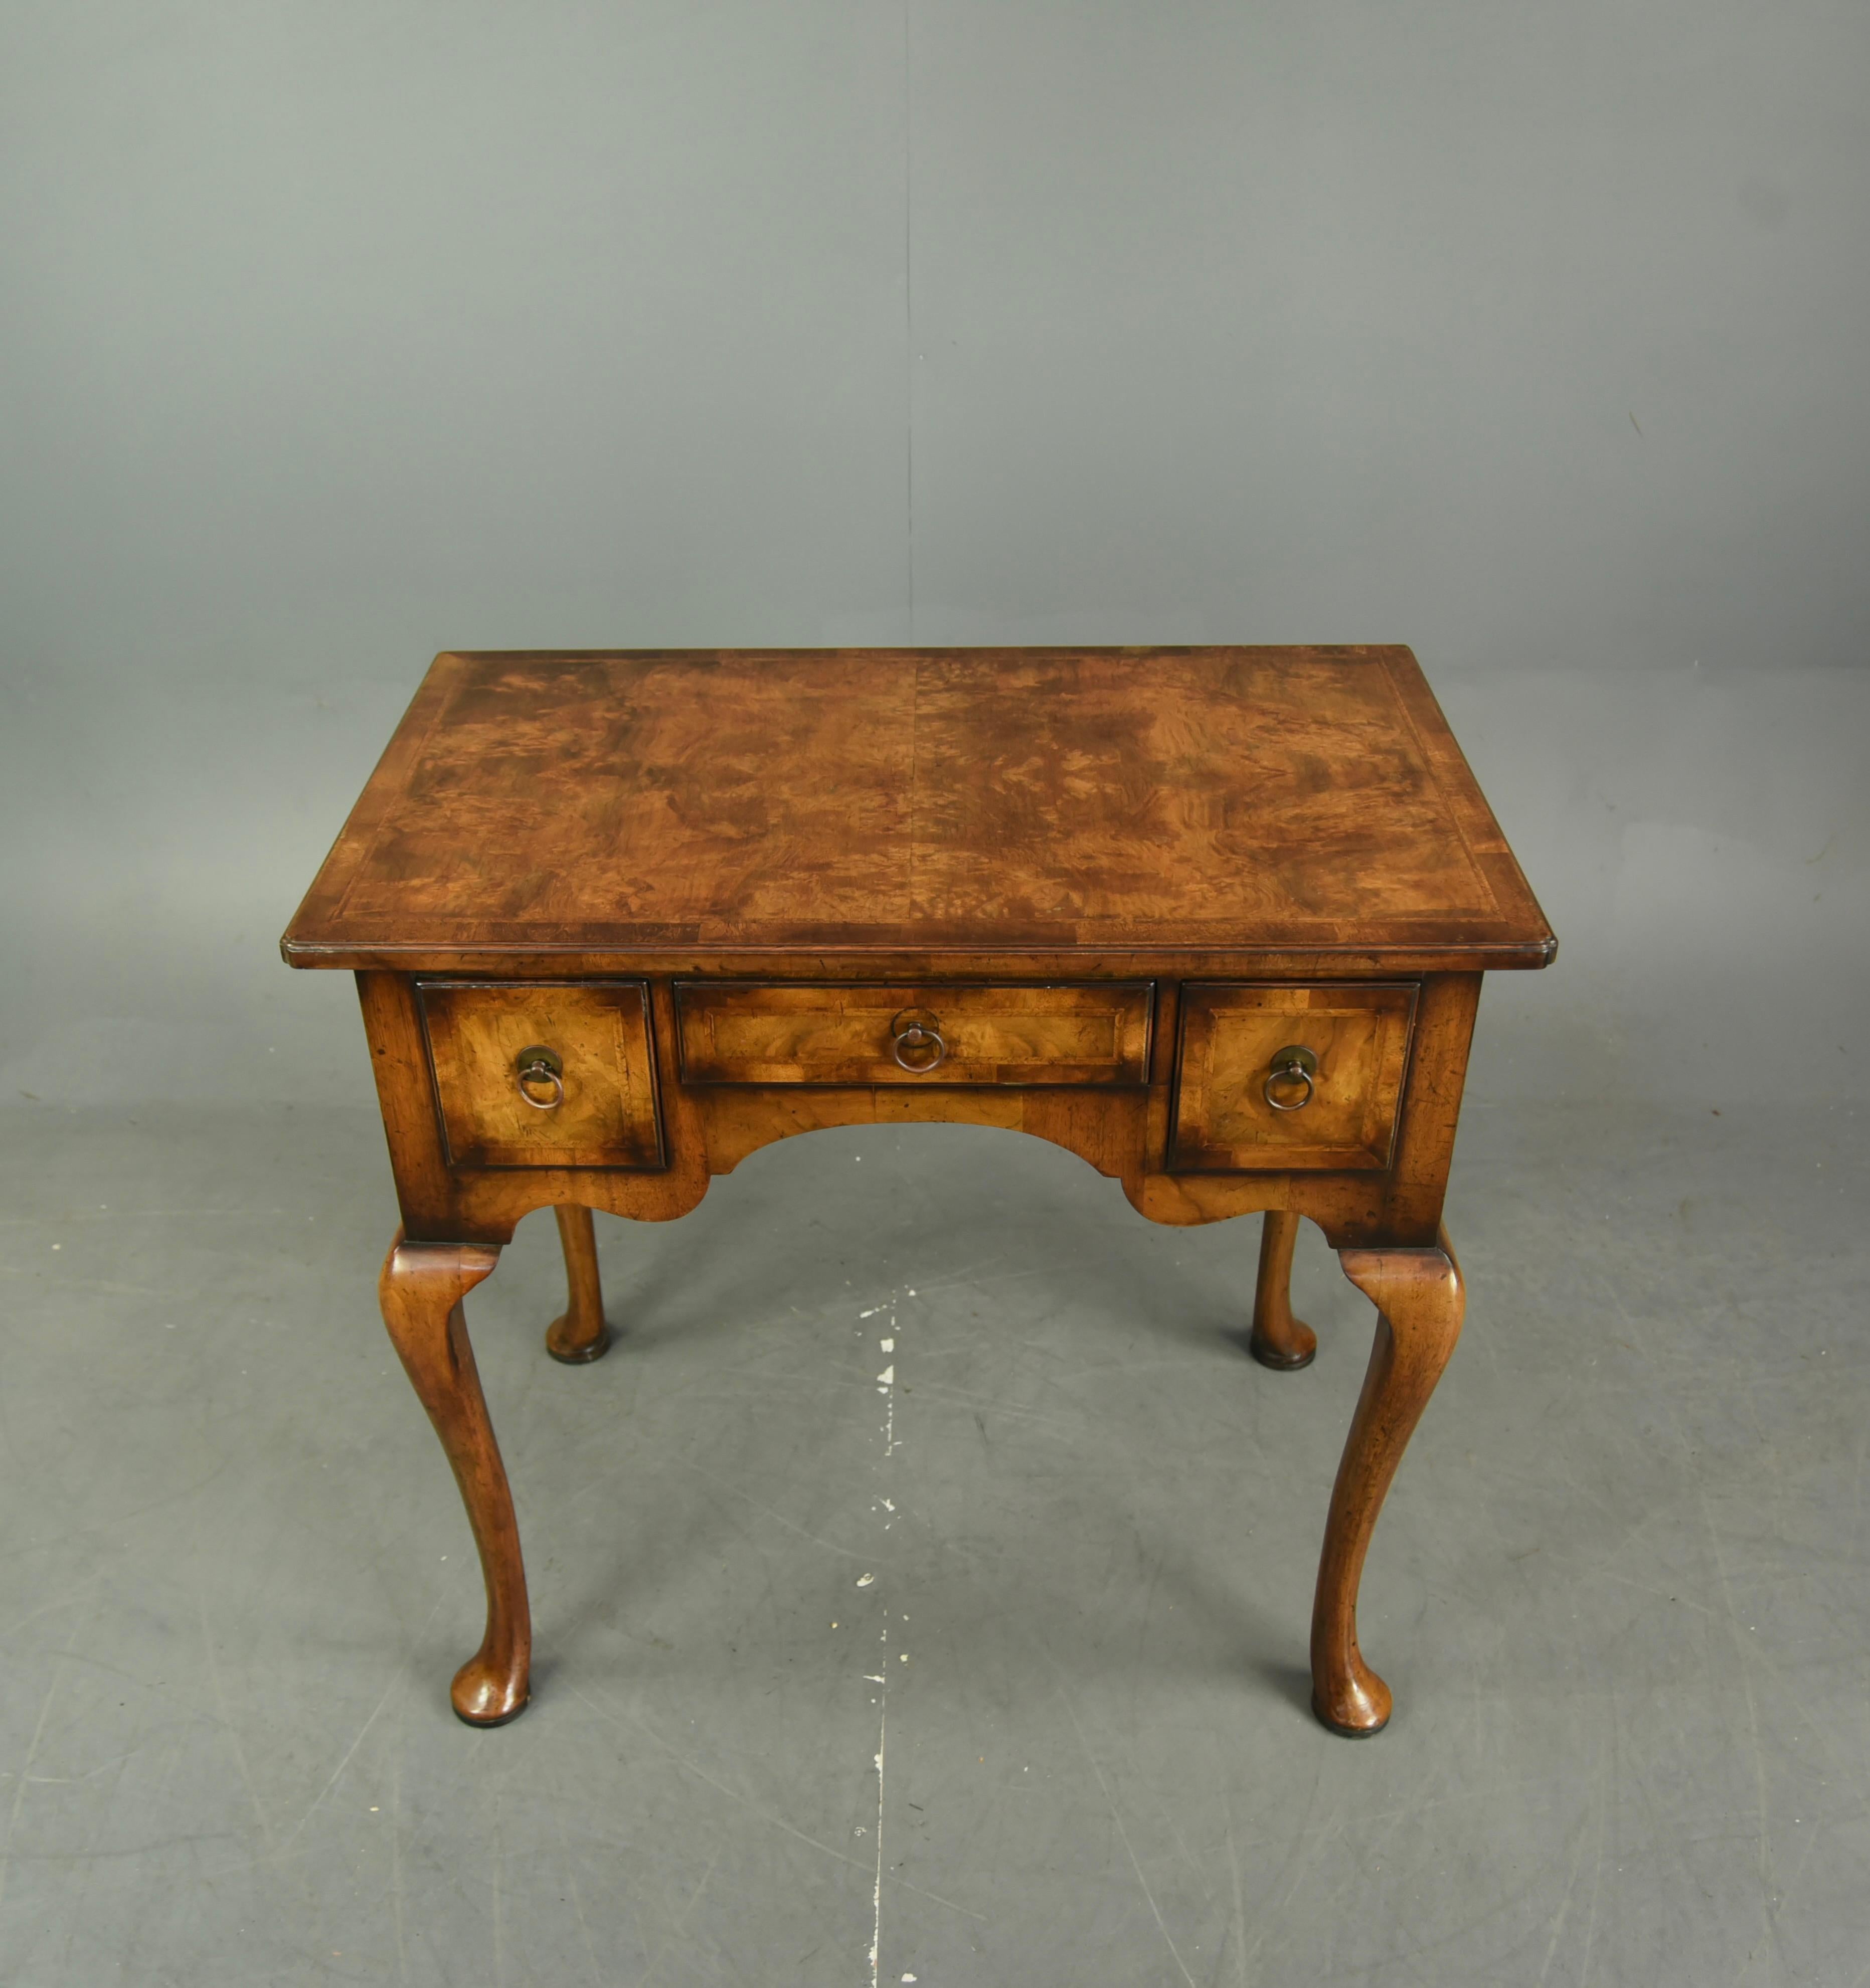 Good quality Georgian style walnut side table, circa 1900.
The side table has a great colour and grain with three very useful oak lined hand dovetailed drawers standing on wonderful Queen Anne style cabriole legs.
The side table is in very good